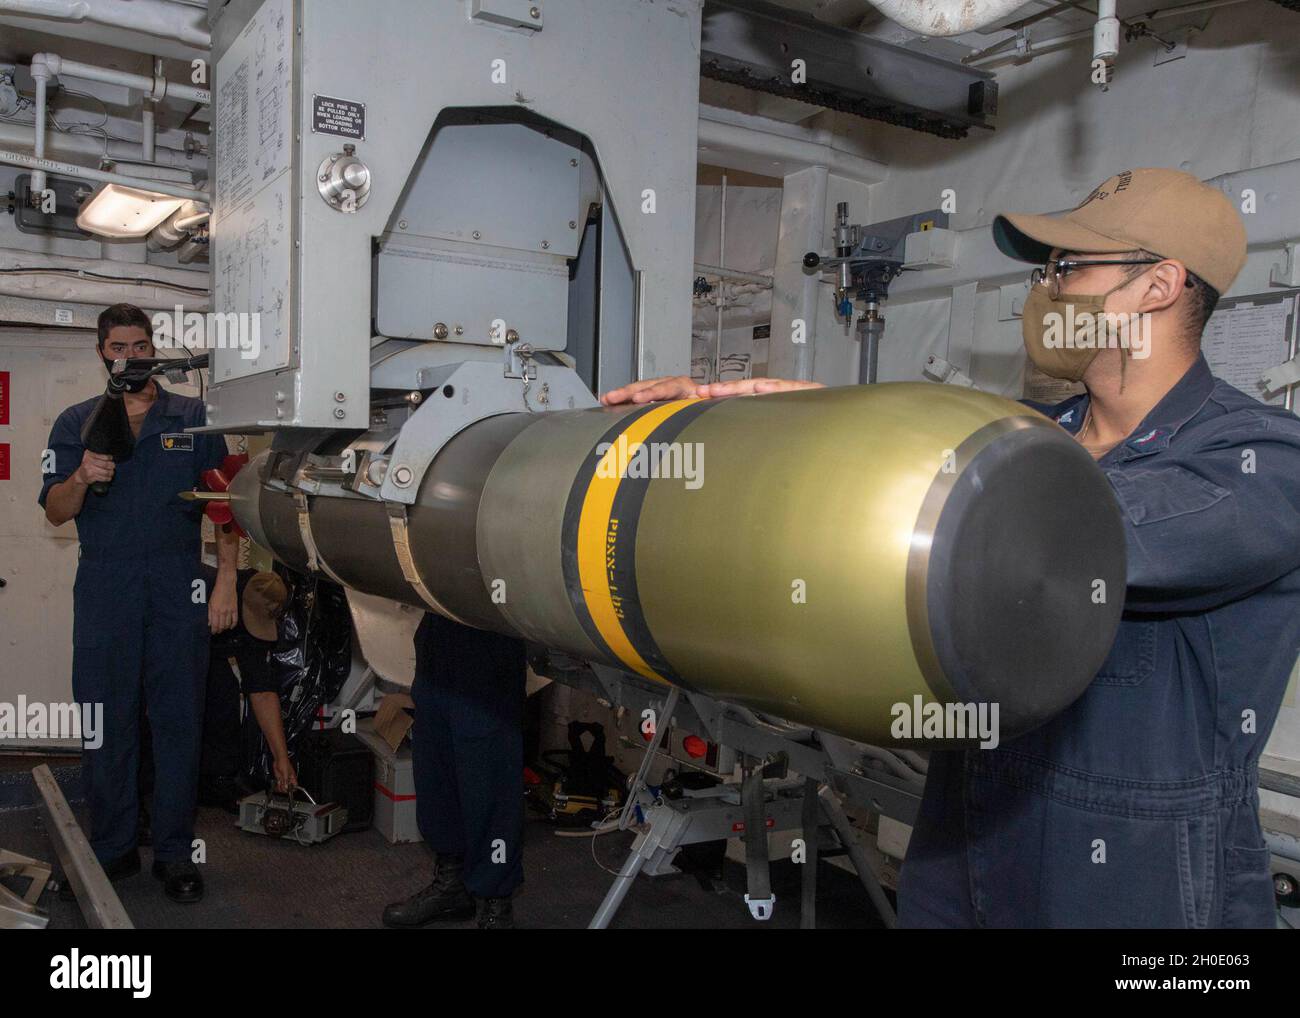 PACIFIC OCEAN (Feb. 5, 2021) U.S. Navy Sonar Technician (Surface) 2nd Class GonzalezPineda, from Victorville, Calif., right, and Sonar Technician (Surface) 3rd Class Jonathan Sherer, from Yucaipa, Calif., move a Mark 46 torpedo aboard the Ticonderoga-class guided-missile cruiser USS Bunker Hill (CG 52) Feb. 5, 2021. Bunker Hill, part of the Theodore Roosevelt Carrier Strike Group, is on a scheduled deployment to the U.S. 7th Fleet area of operations. As the U.S. Navy’s largest forward deployed fleet, with its approximate 50-70 ships and submarines, 140 aircraft, and 20,000 Sailors in the area Stock Photo